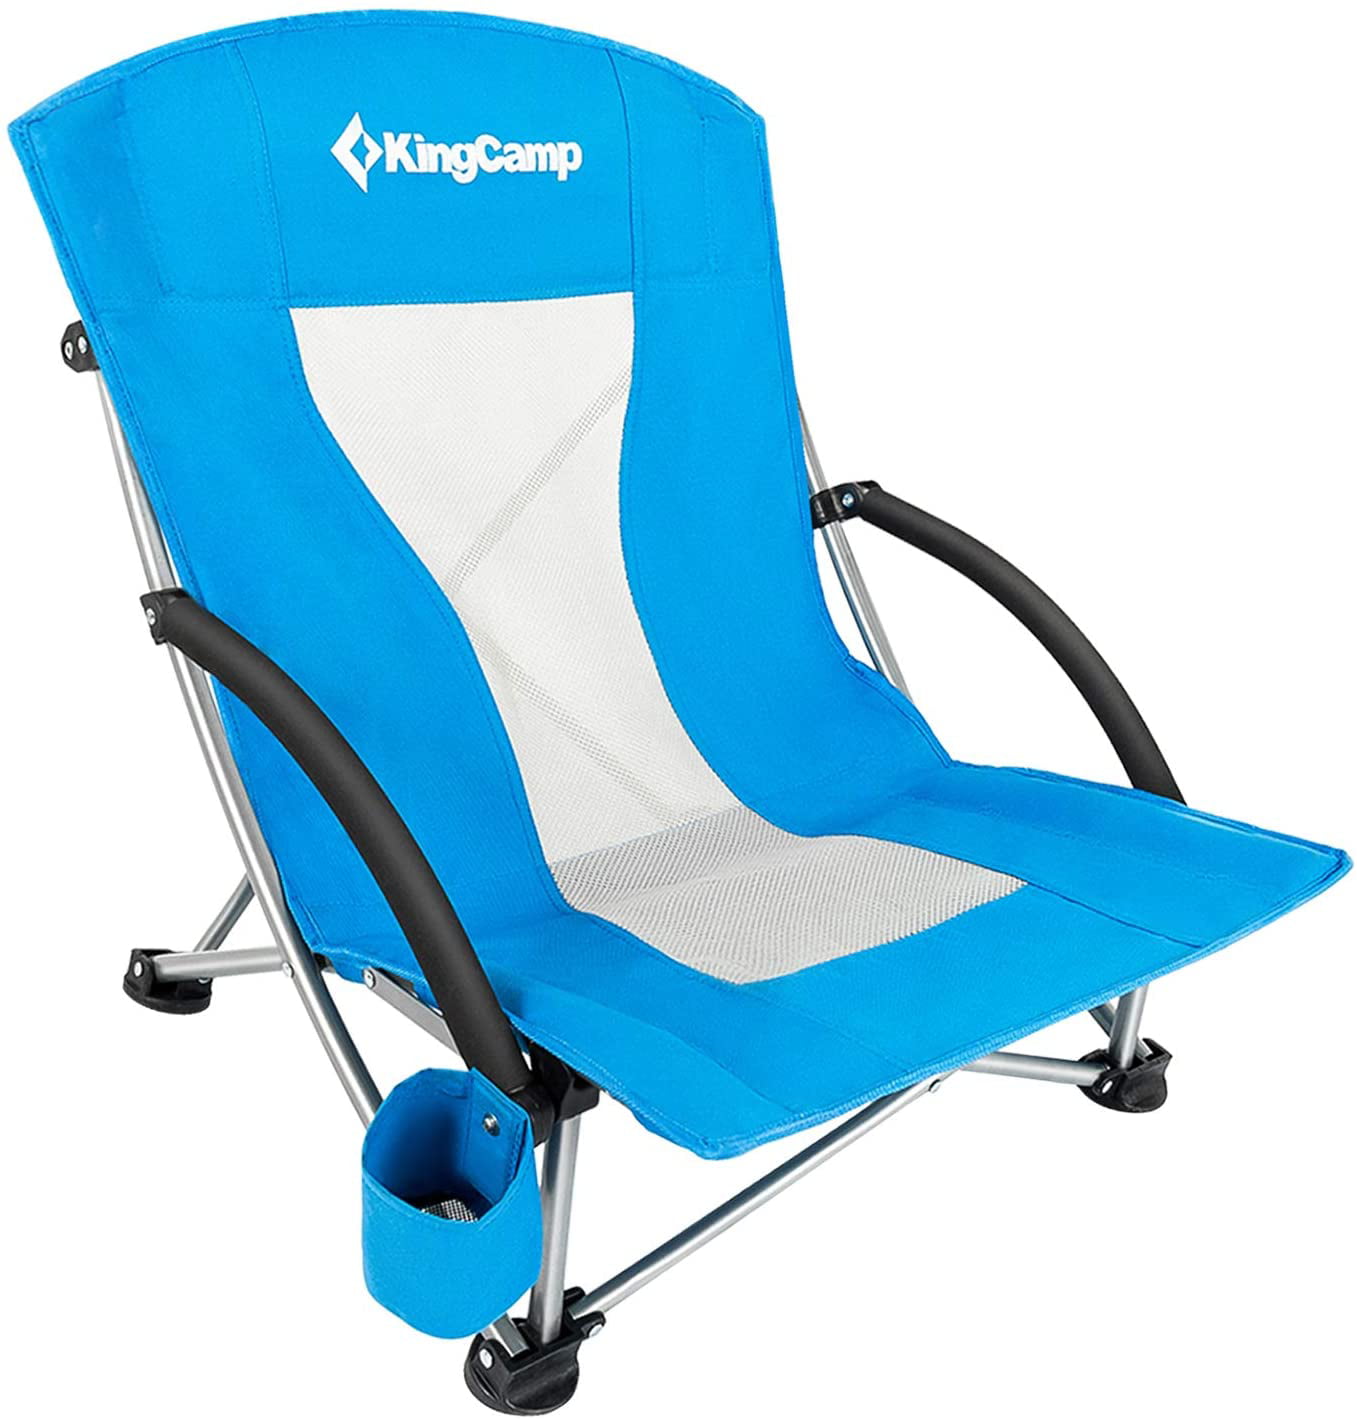  Double Seat Folding Beach Chair for Large Space